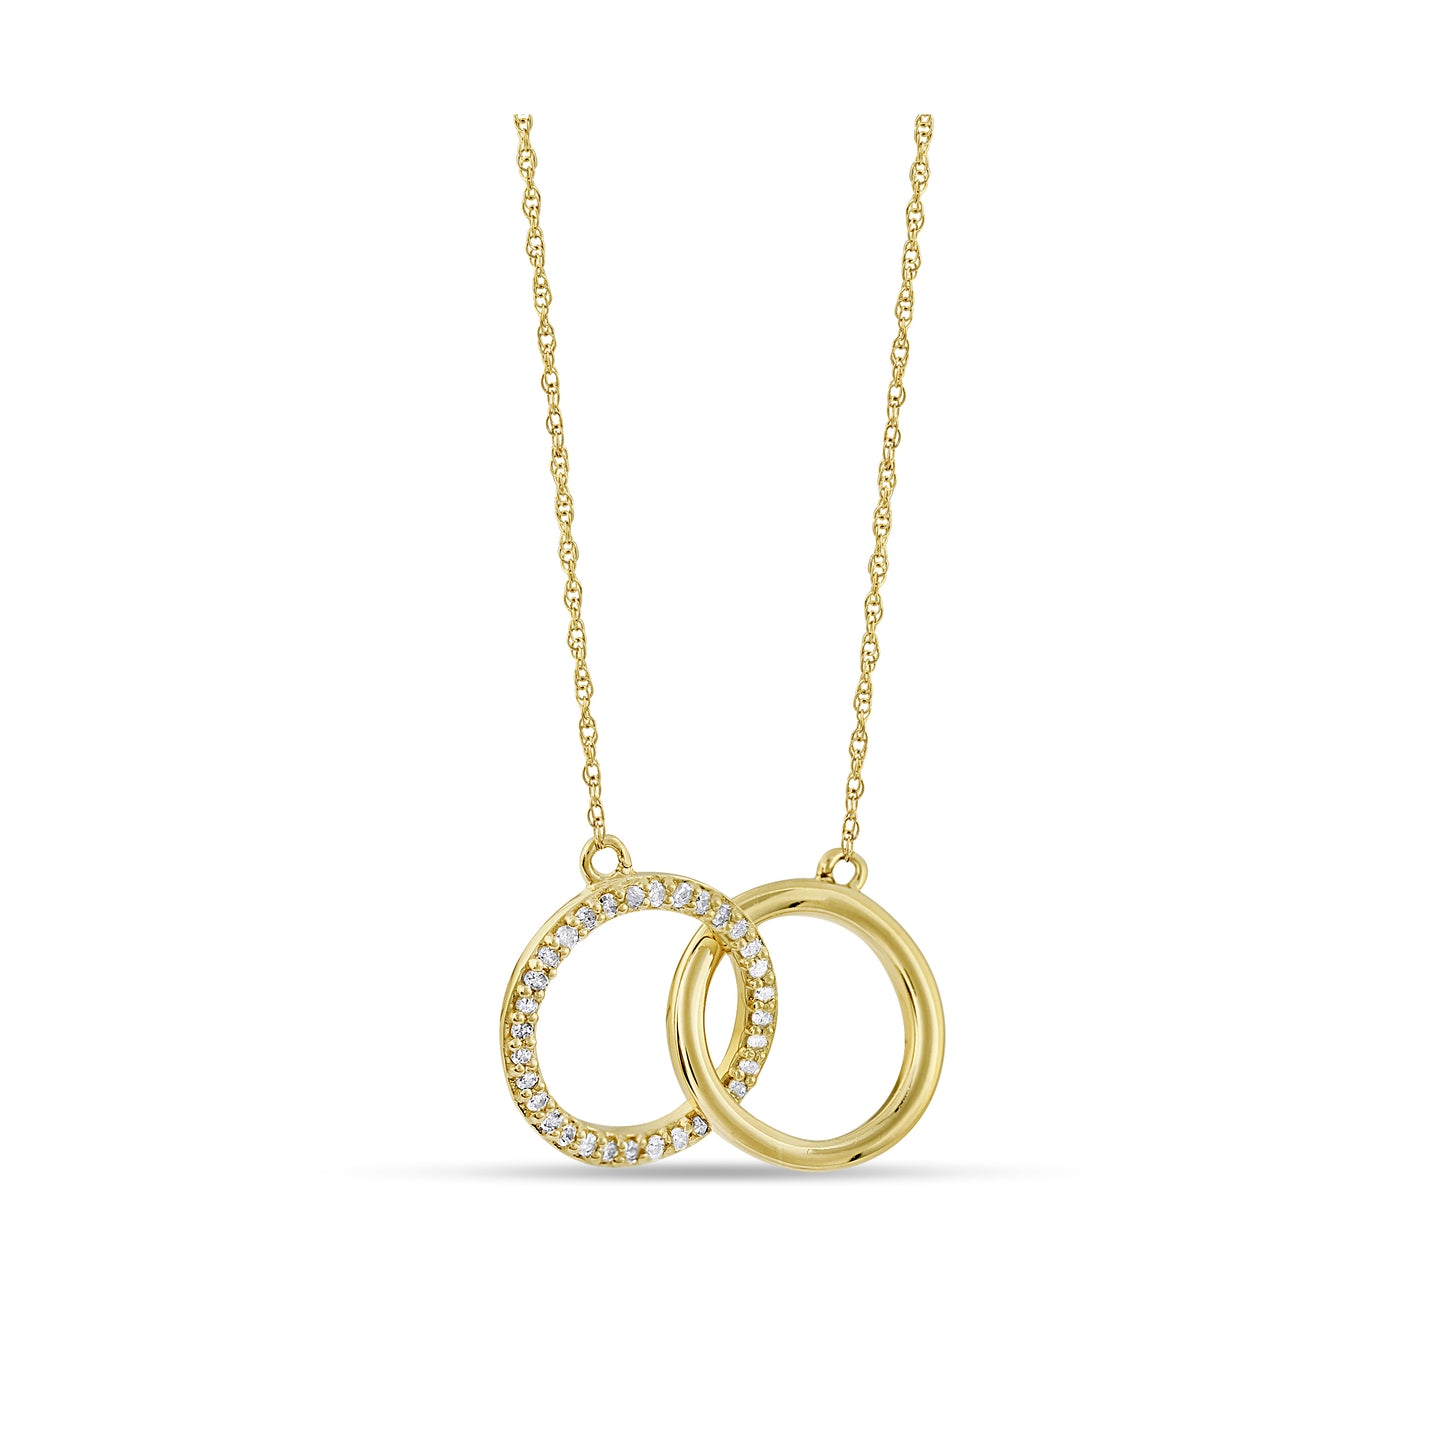 Belantina 1/10 Carat Diamond Interlocking Circles Pendant Necklace for Women in 14k White and Yellow Gold on 18 Inch Chain (H-I, I1-I2, cttw) Spring Ring